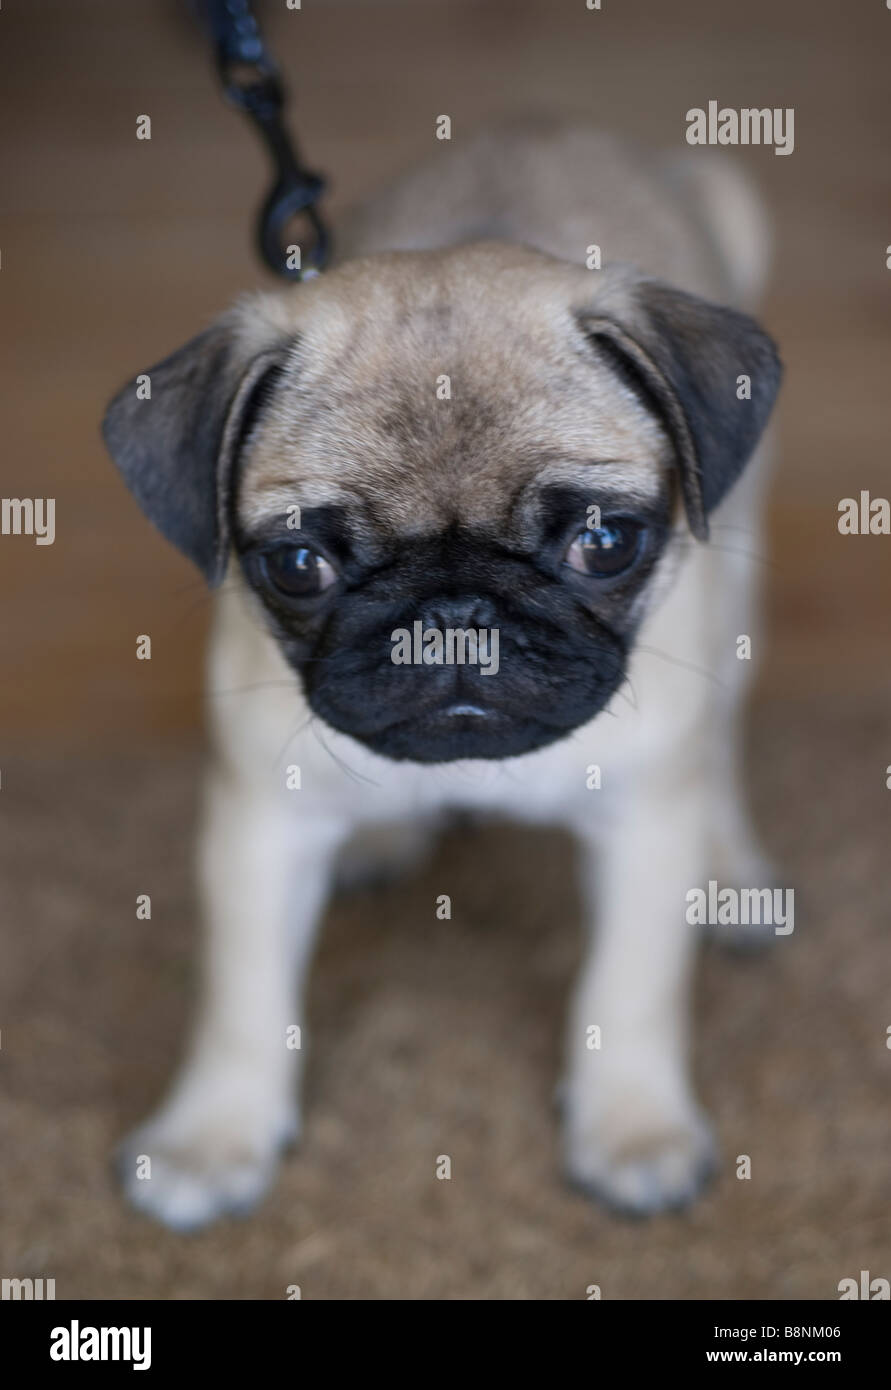 Puppy pug dog on a lead Stock Photo